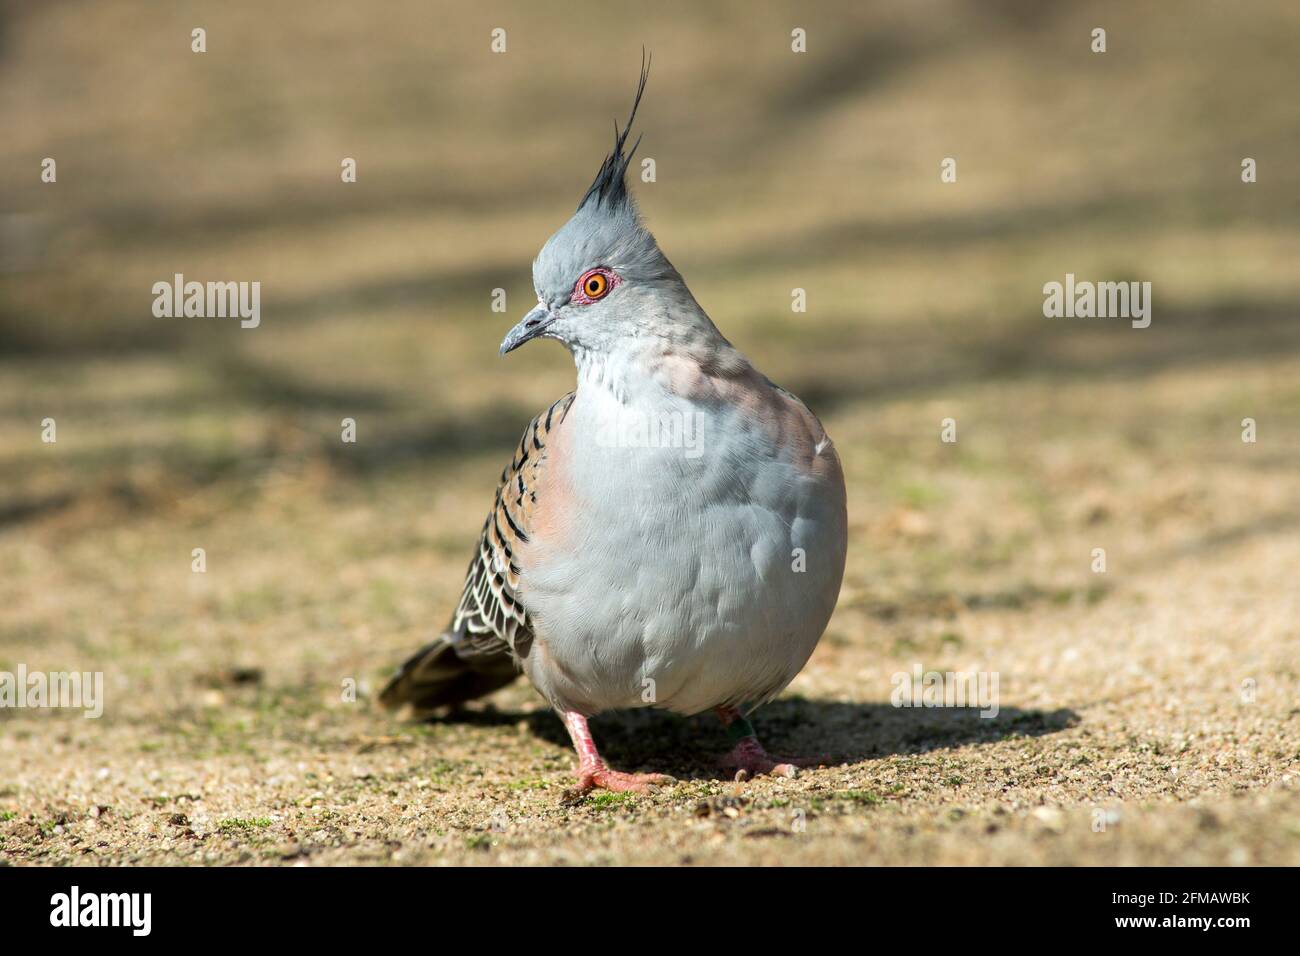 The shorthaired pigeon, also known as the Australian crested pigeon, Ocyphaps lophotes, is a species of pigeon native to Australia. Stock Photo